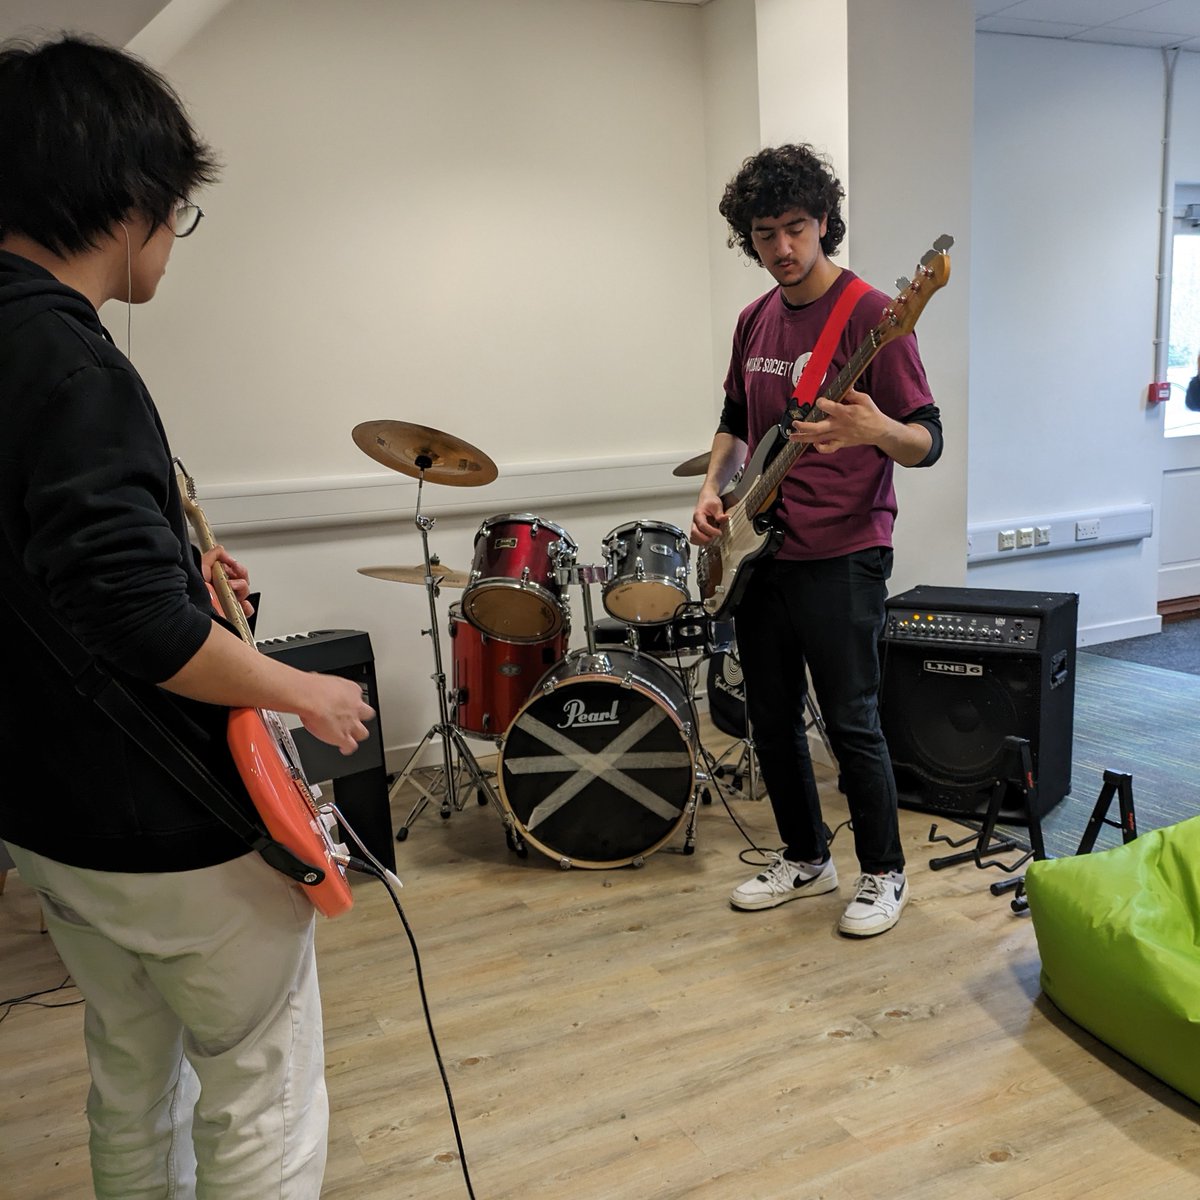 Last month students enjoyed a music jam session with @essexmusicsociety!

We hope to do another collab event again for more students to get involved.

#KaplanLife #YourPathYourWay #UEIC #StudentLife #StudyinColchester #StudyAbroad #UniofEssex #Essex